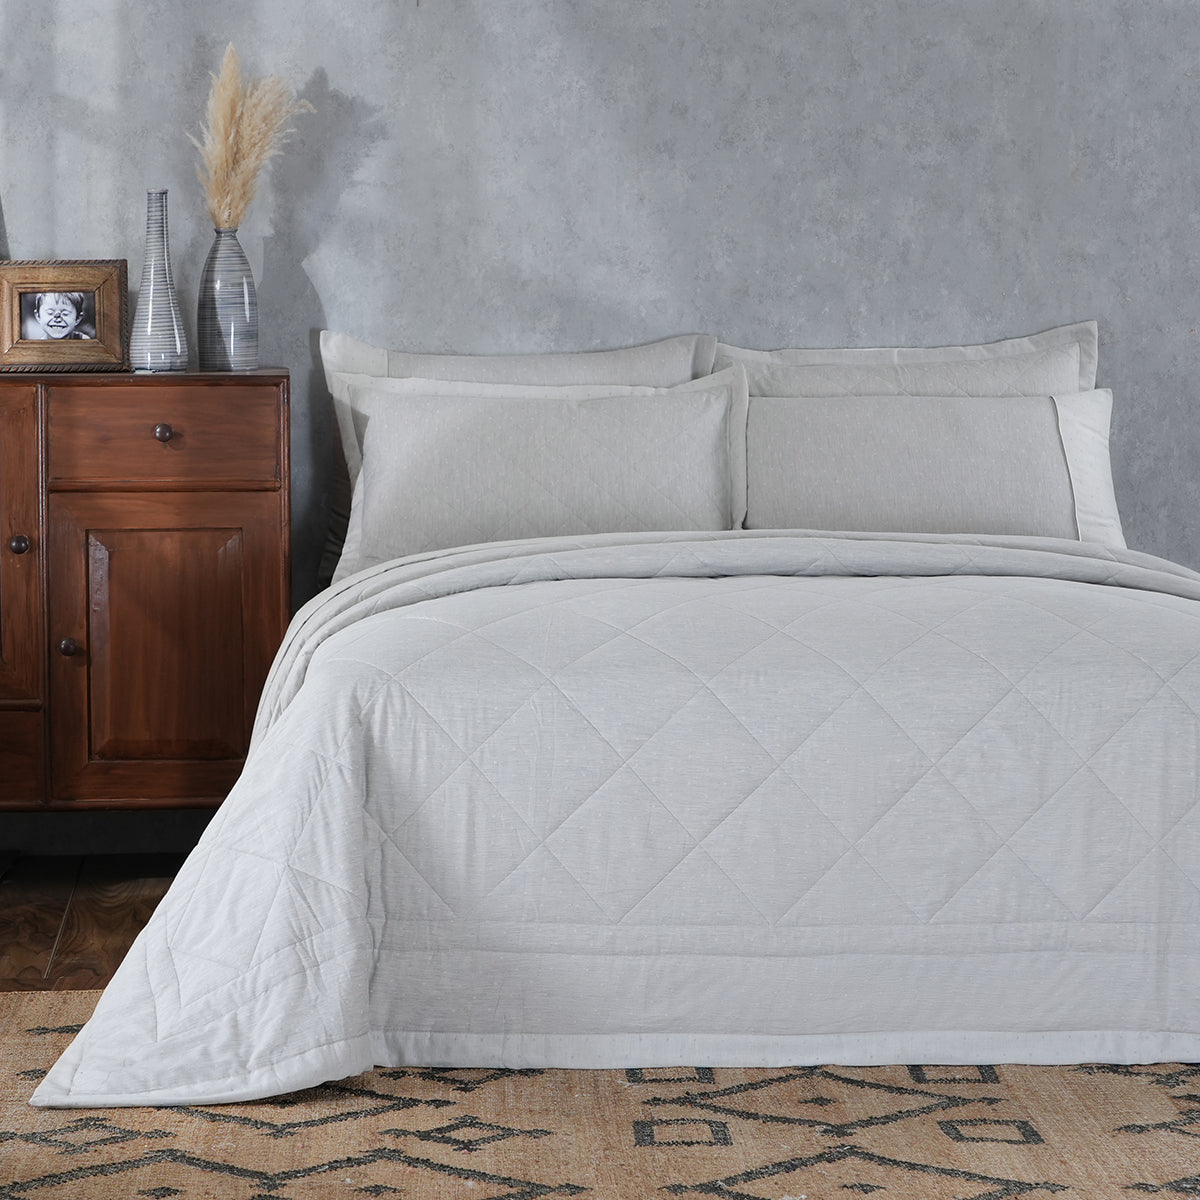 Muted Dot 100% Natural Cotton Filling Summer AC Quilt/Quilted Bed Cover/Comforter Grey